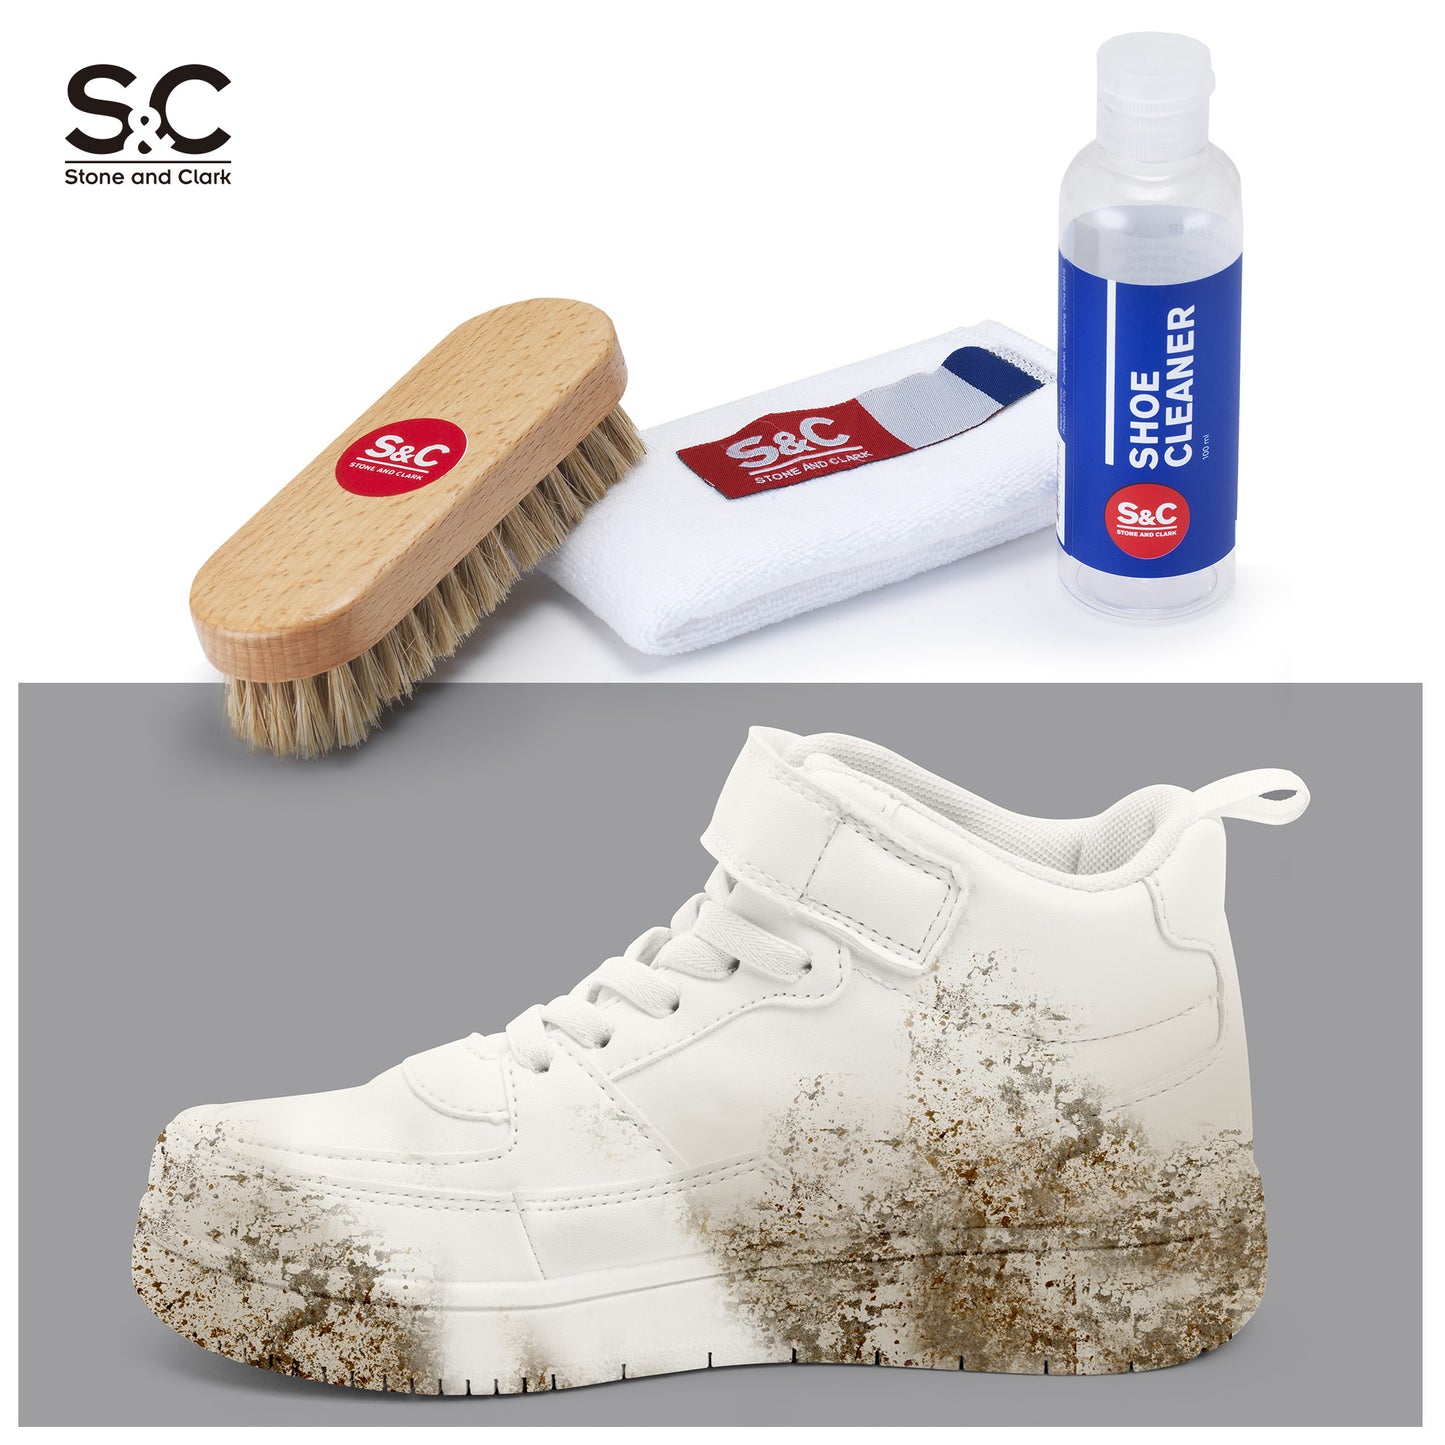 Compact Sneaker Cleaner: Easy On-the-Go Kit